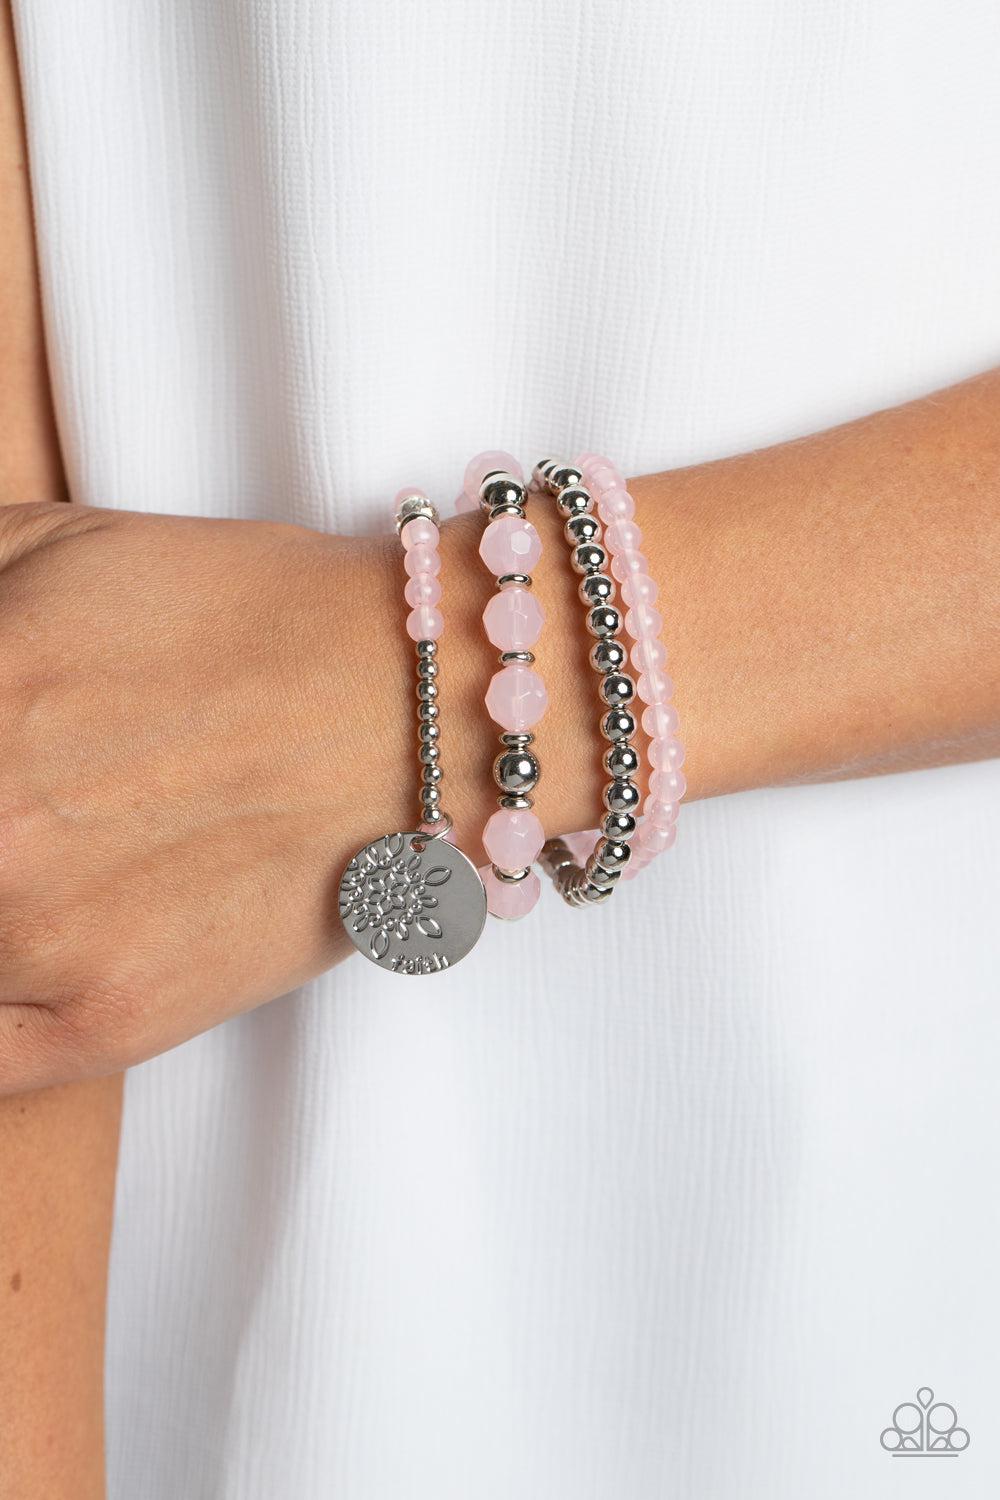 Surfer Style Pink Inspirational Bracelet - Paparazzi Accessories-on model - CarasShop.com - $5 Jewelry by Cara Jewels